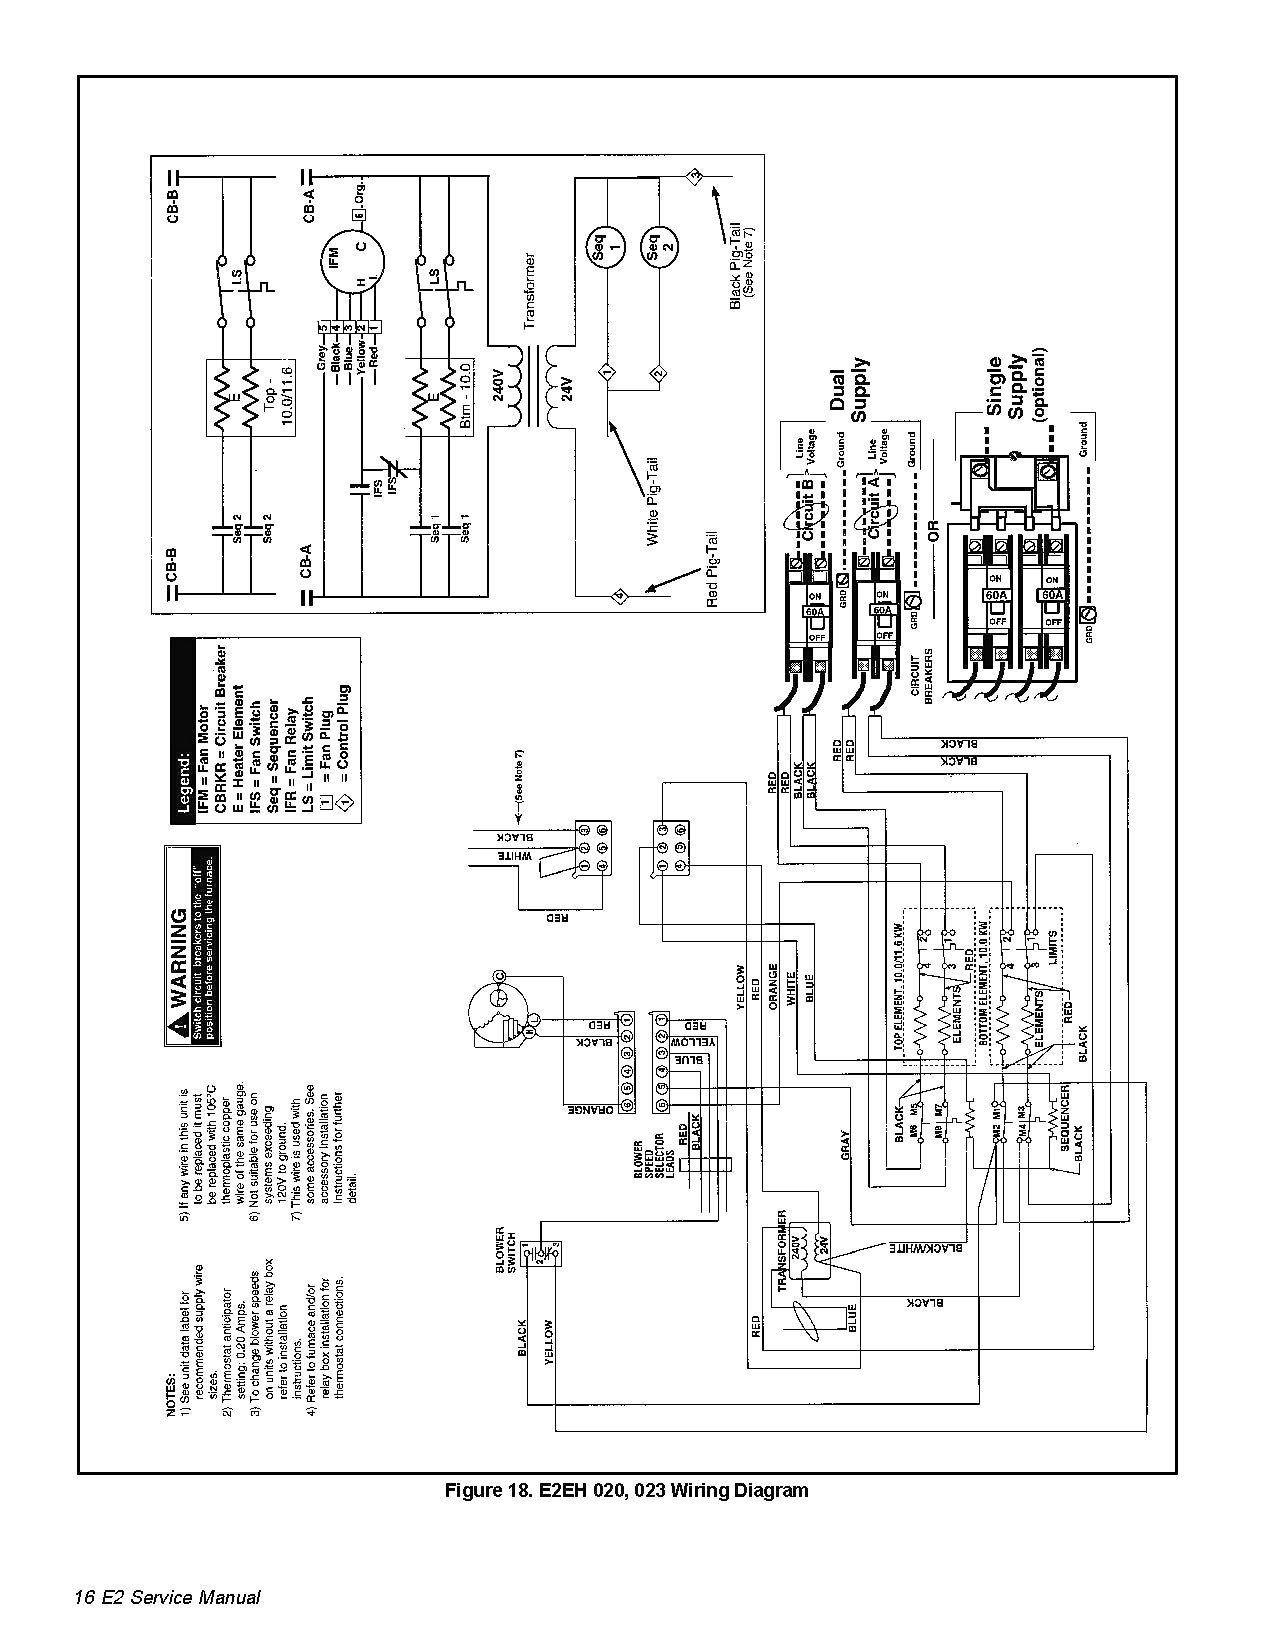 Electric Heat Furnace Wiring Diagram Refrence nordyne Heat Pump Wiring Diagram New Intertherm Electric Furnace